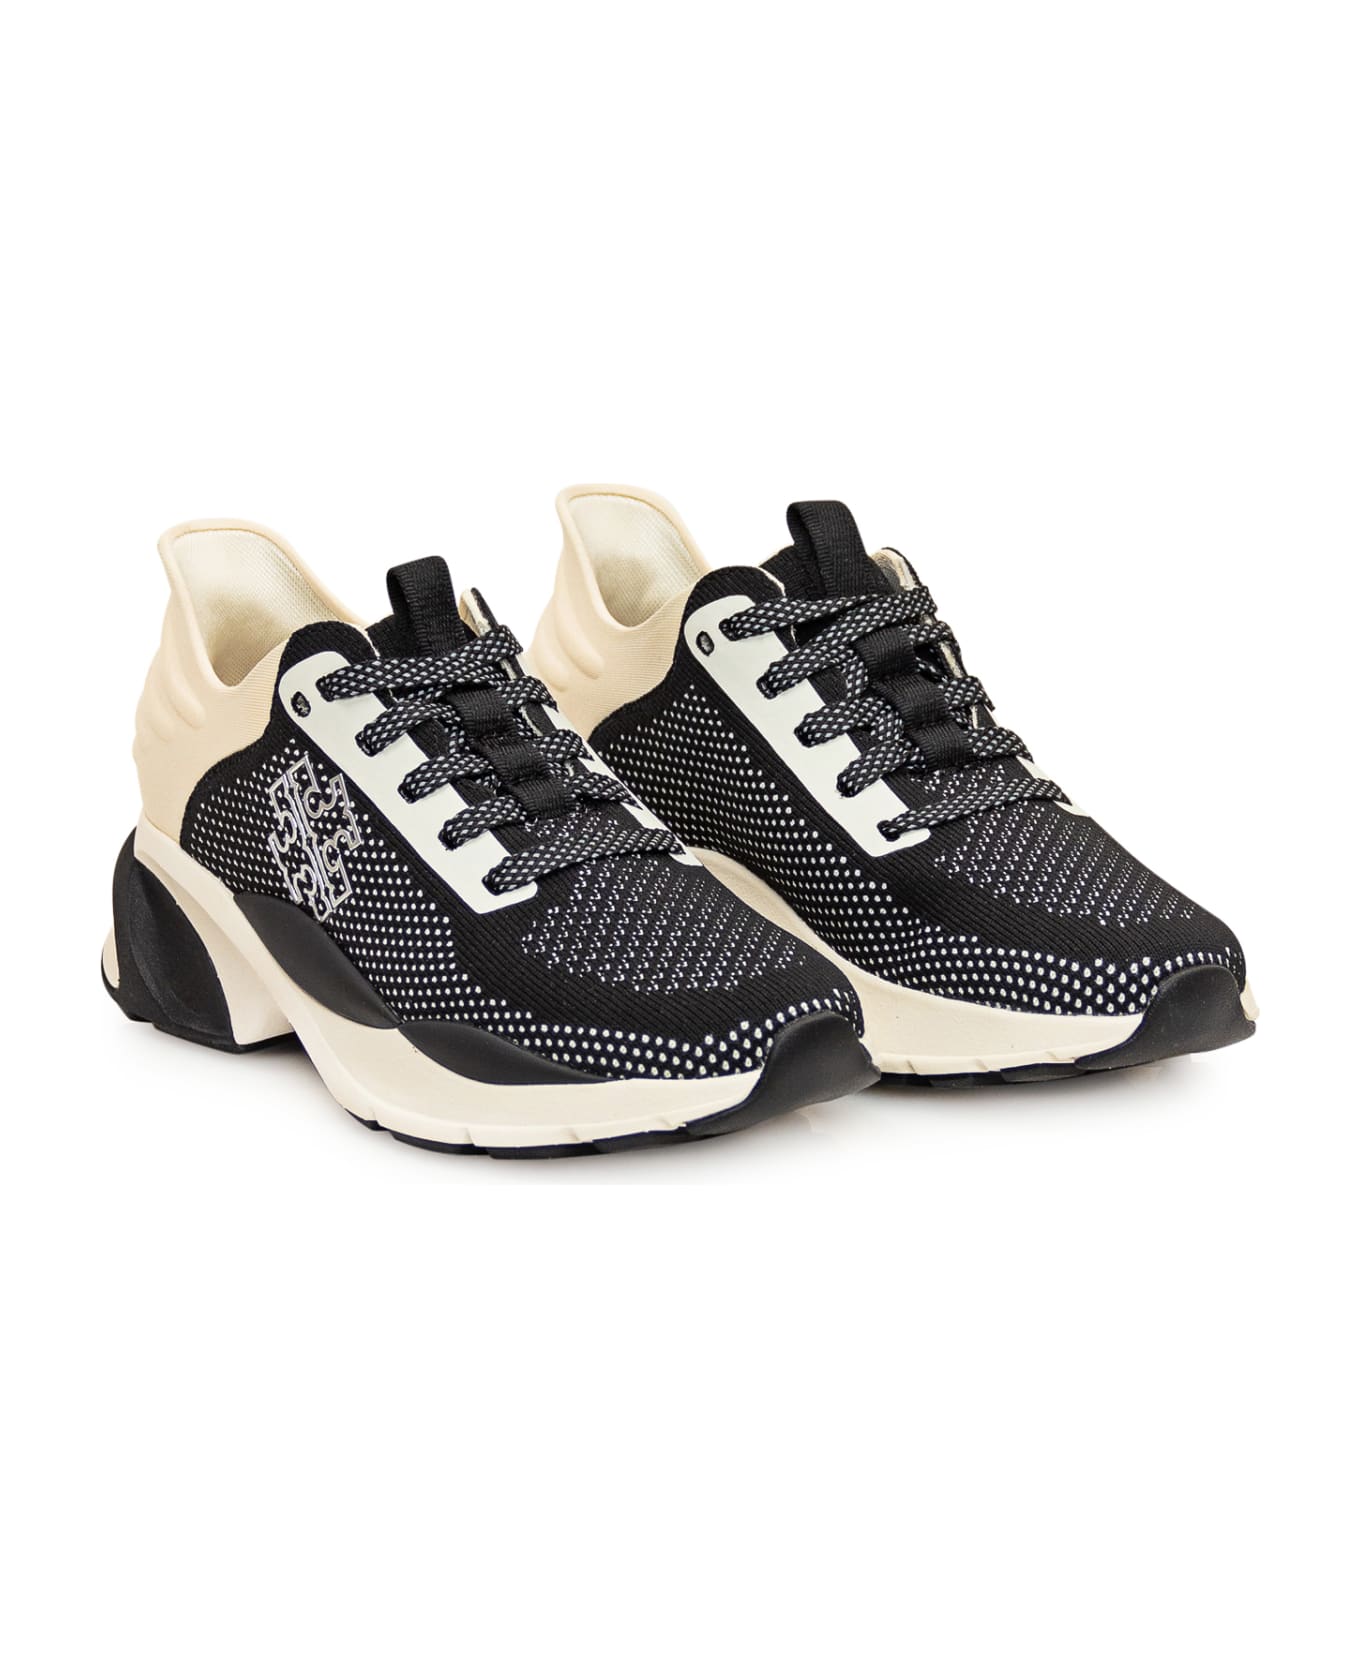 Tory Burch Good Luck Trainer Sneaker - BLACK/NEW IVORY